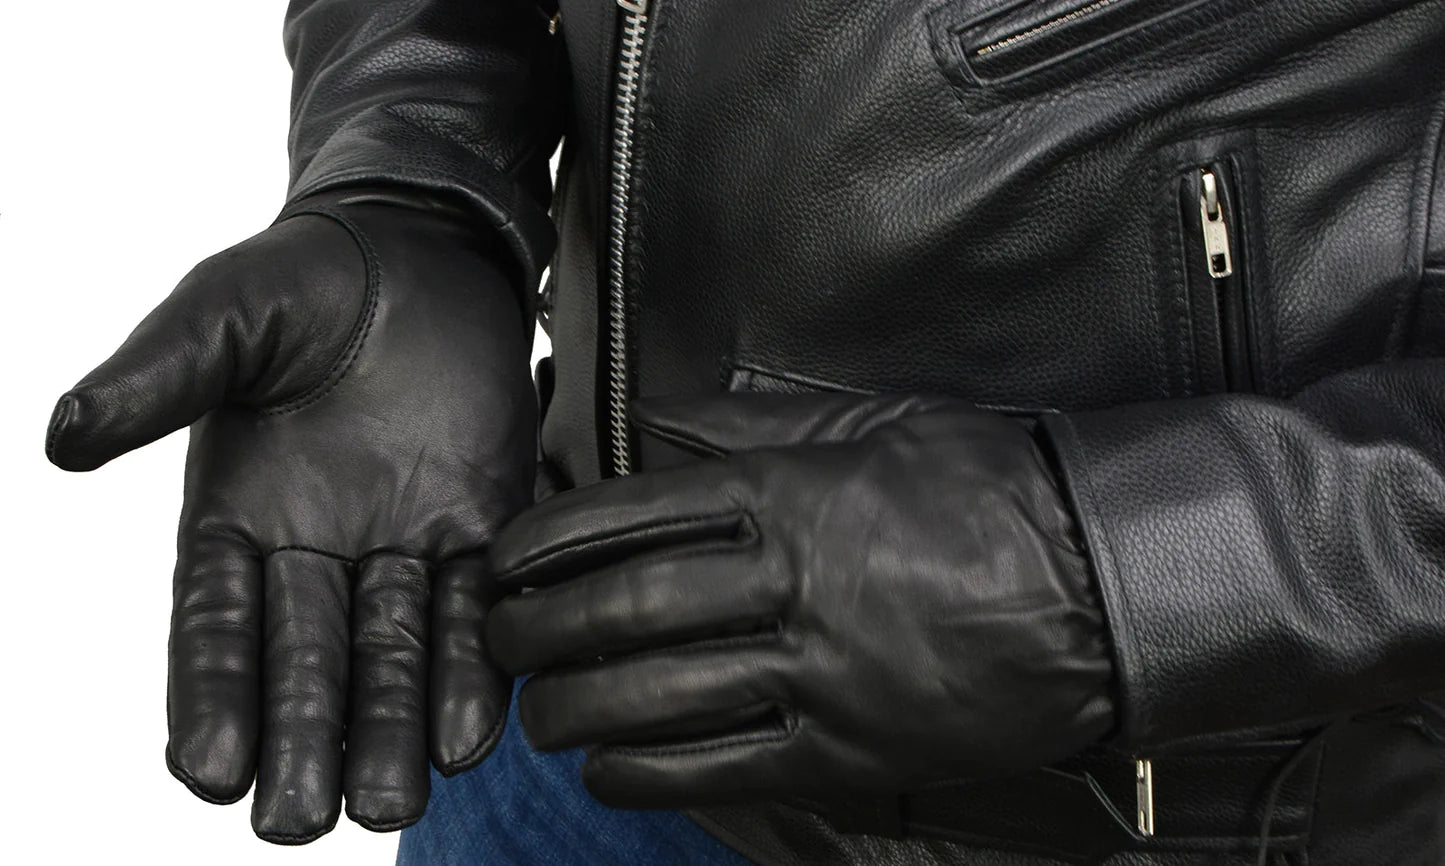 Men's Black Leather Thermal Lined Gloves with Cinch Wrist